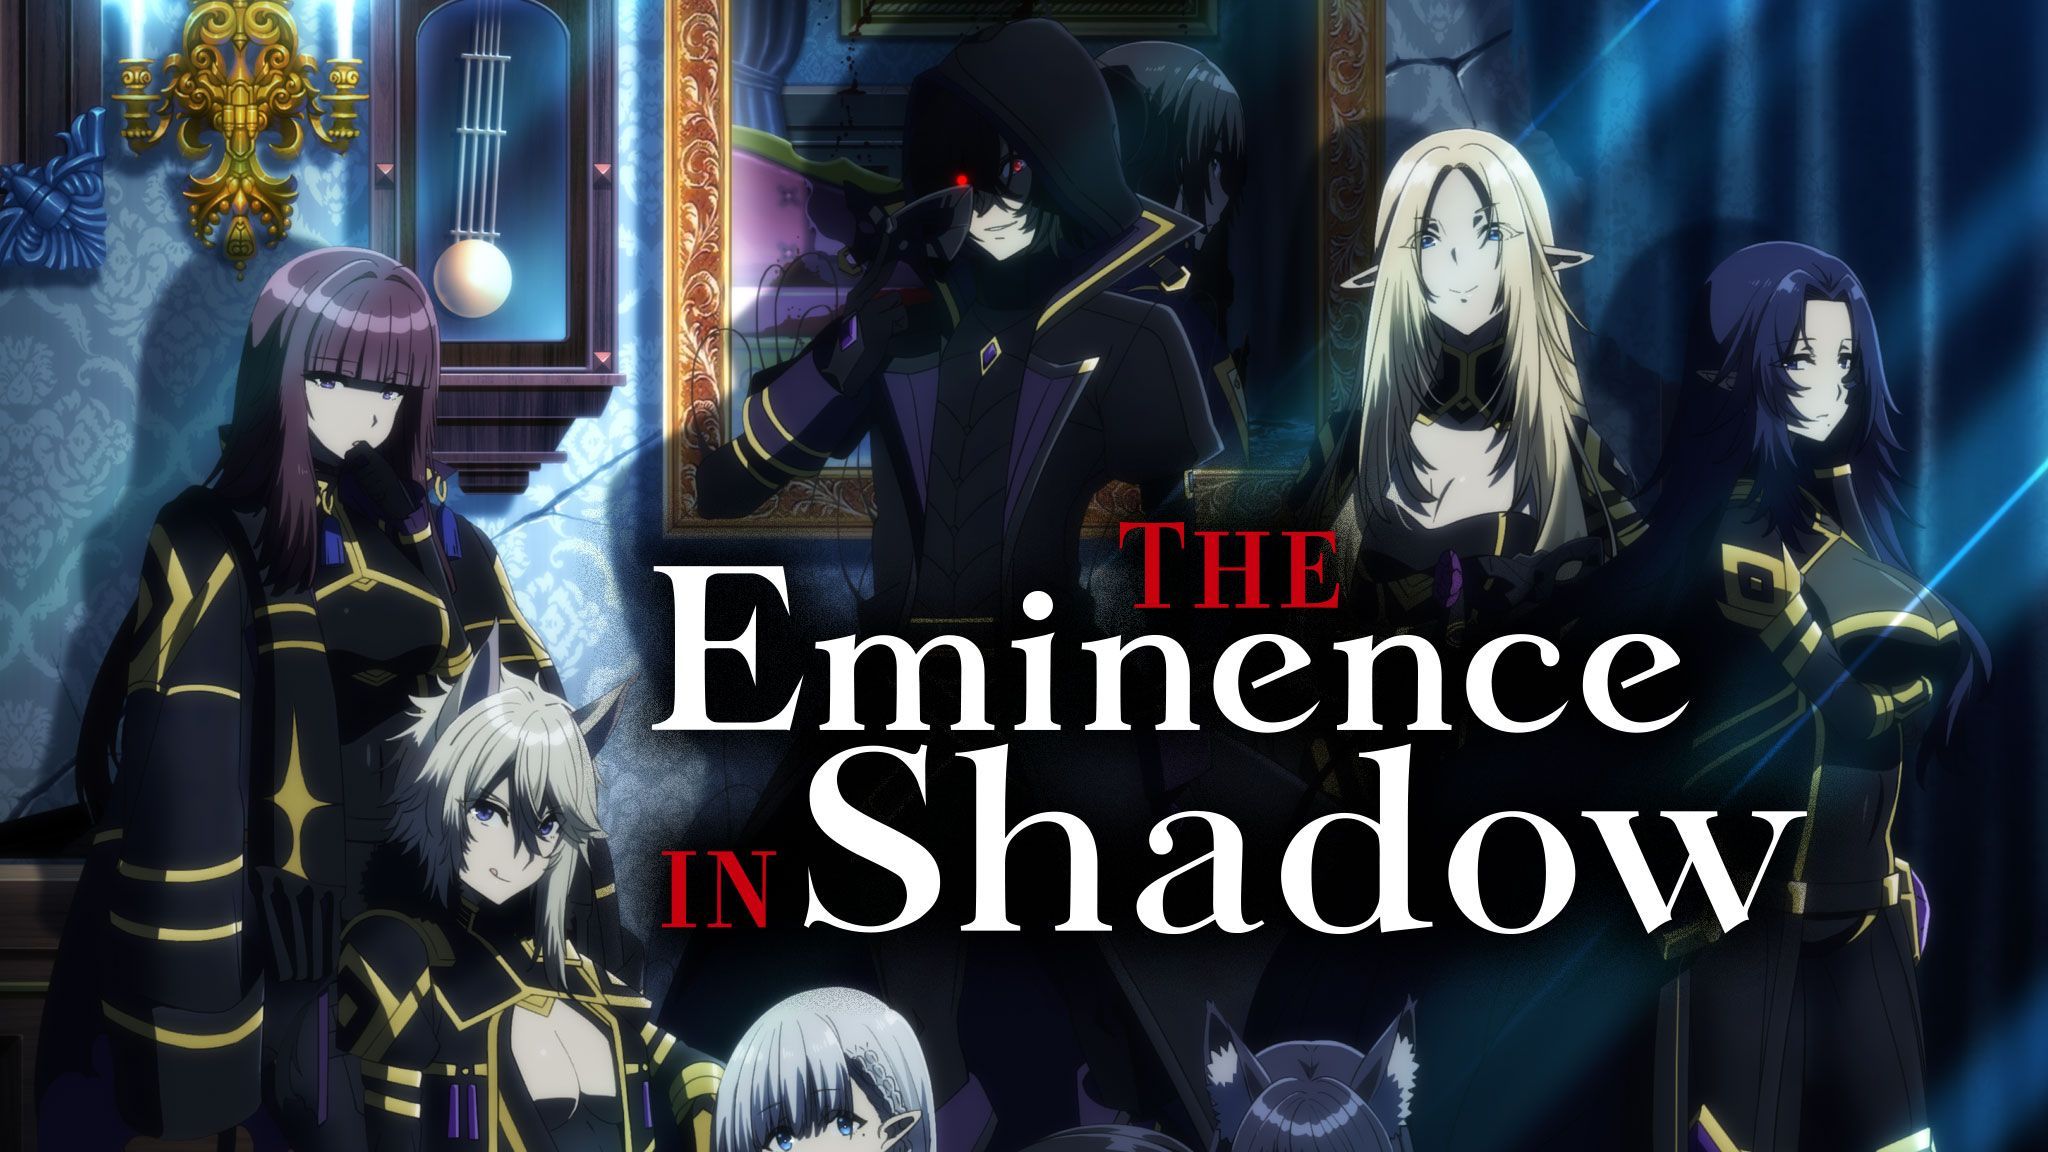 Your Life, Your Wish, The Eminence in Shadow Dub Ep 13